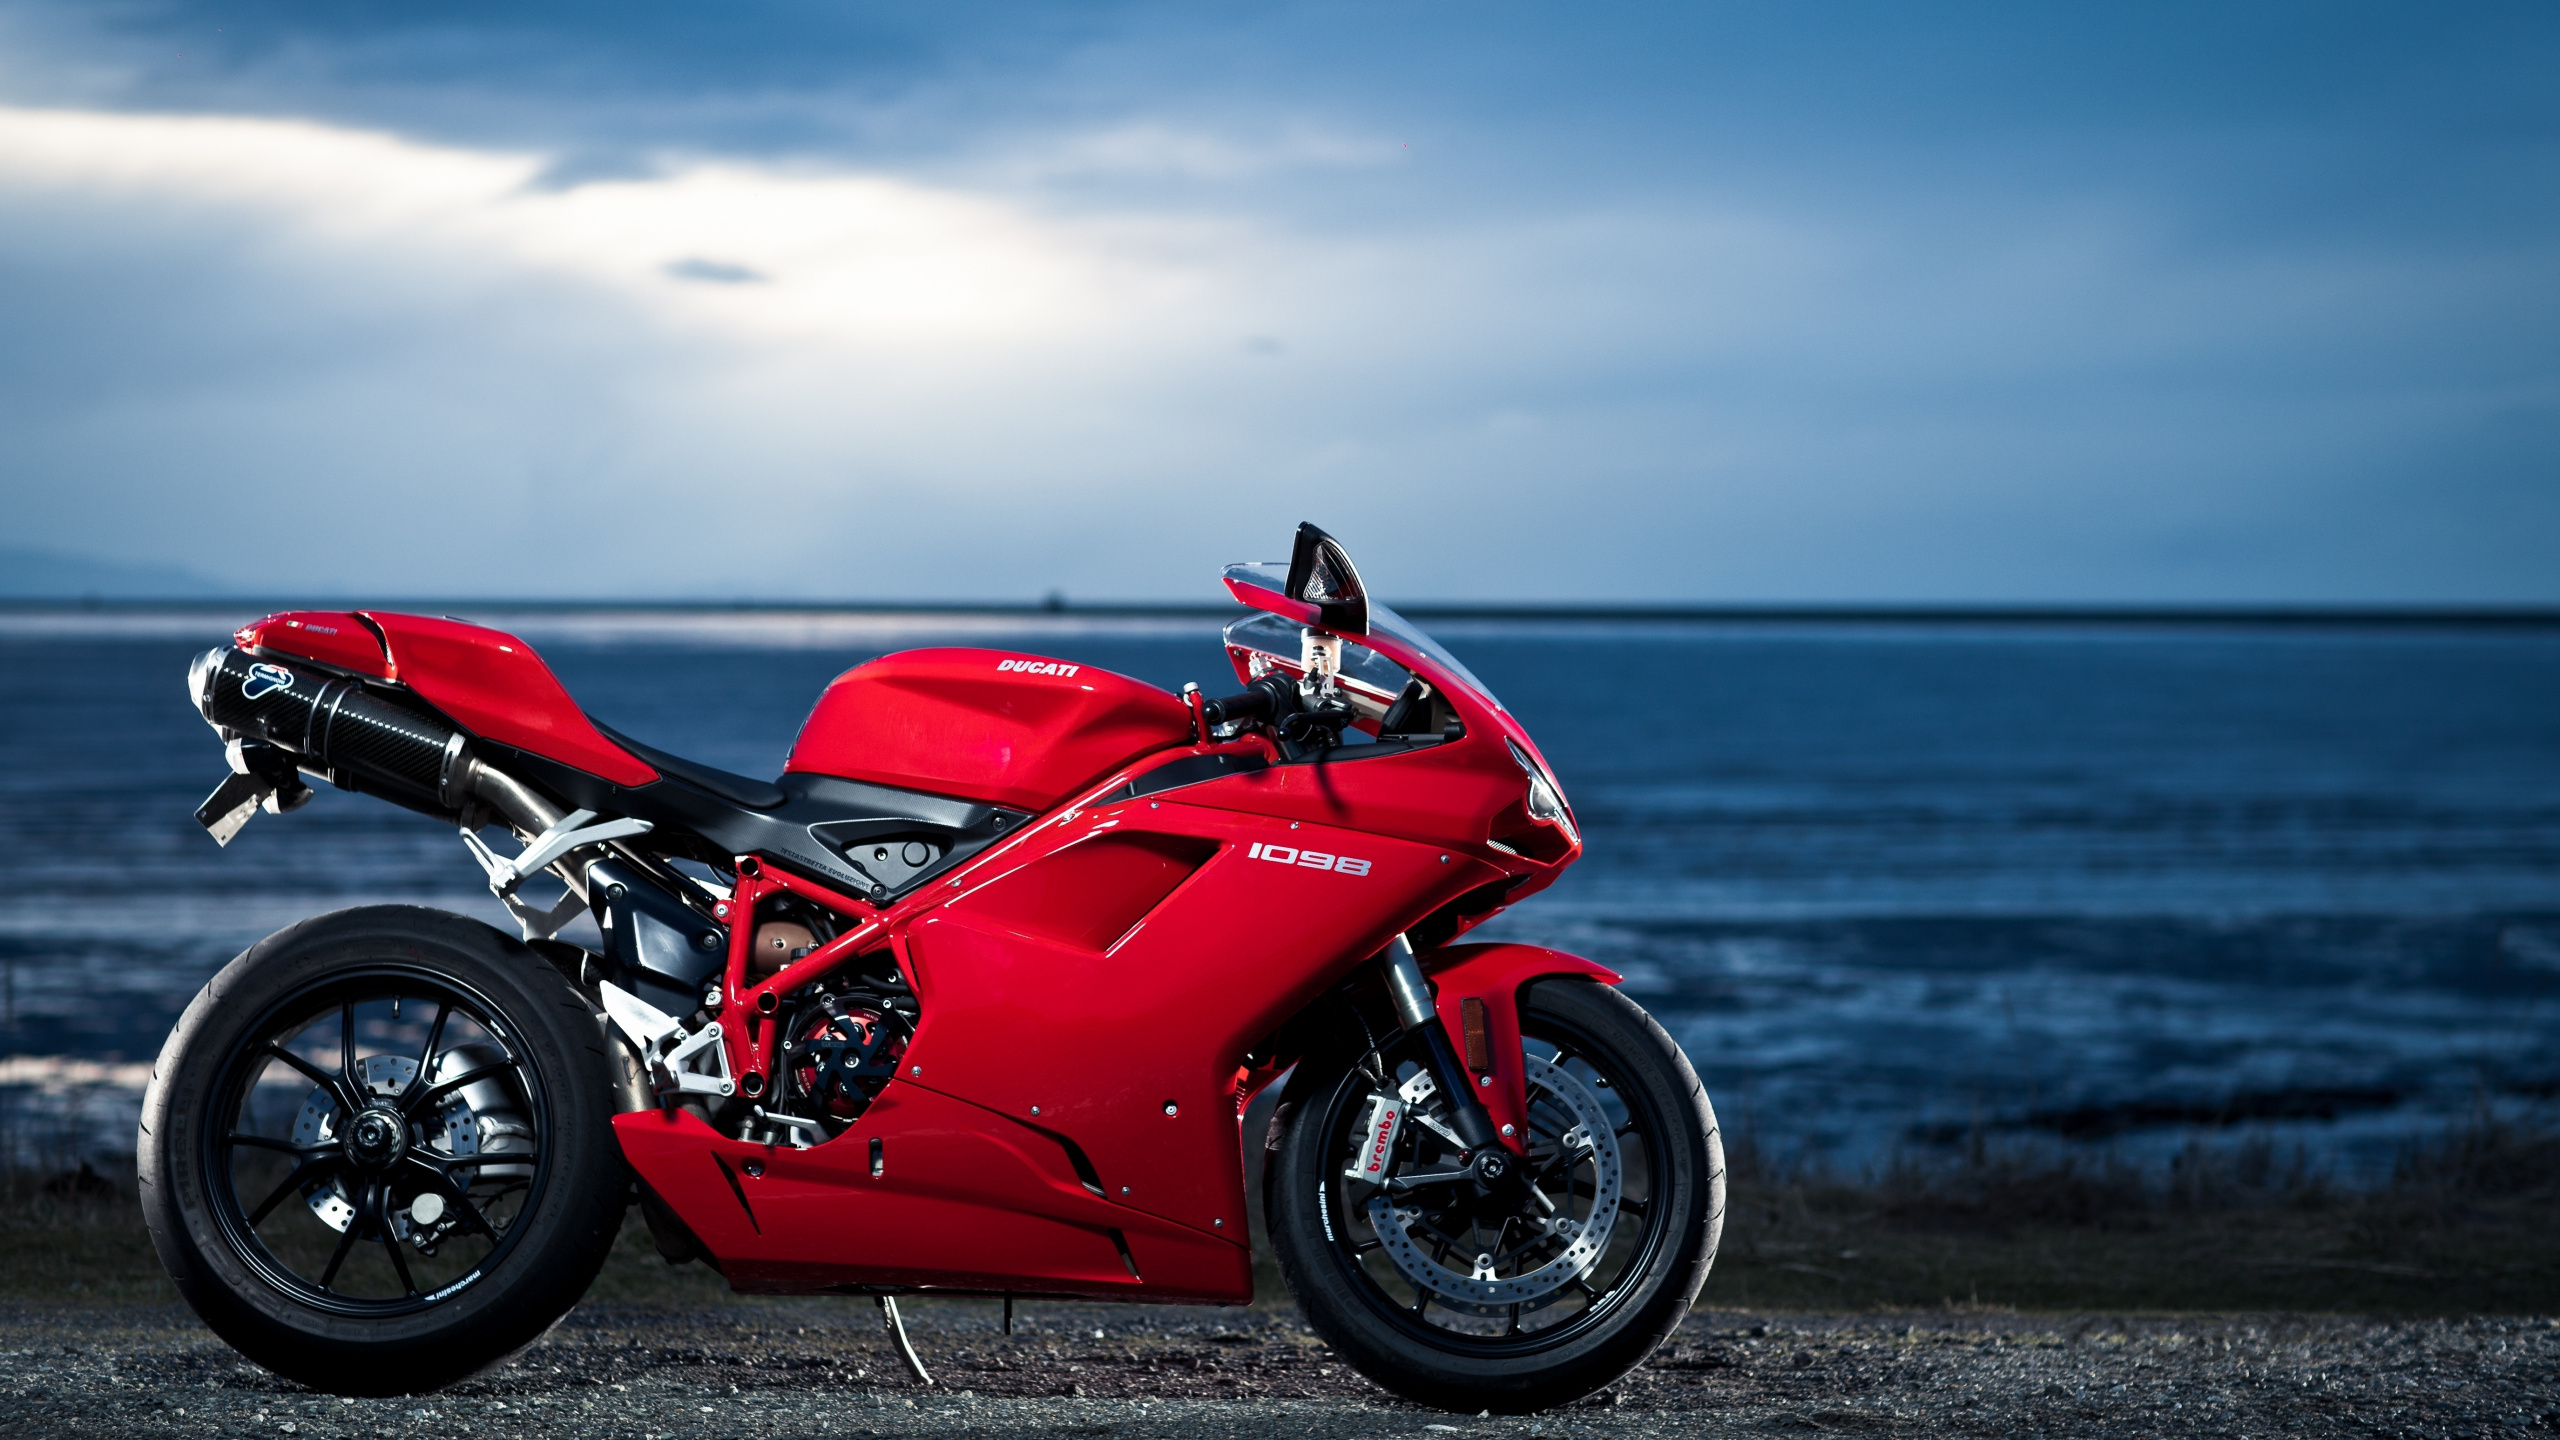 Red and Black Sports Bike on Seashore During Daytime. Wallpaper in 2560x1440 Resolution